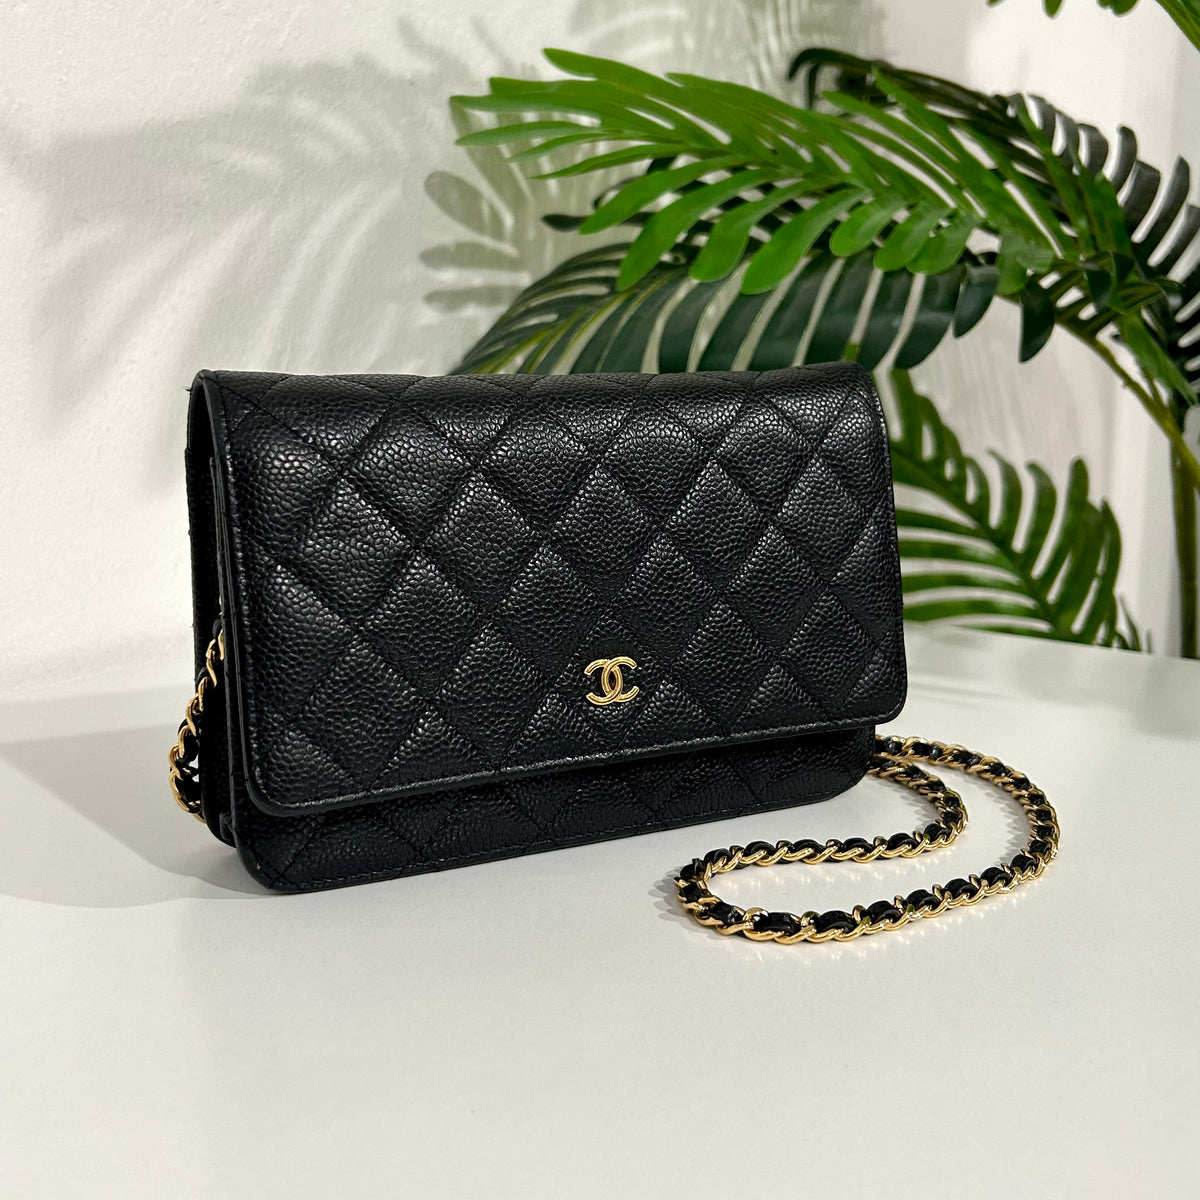 Chanel Mademoiselle Wallet on Chain, Black Caviar with Gold Hardware,  Preowned in Box WA001 - Julia Rose Boston